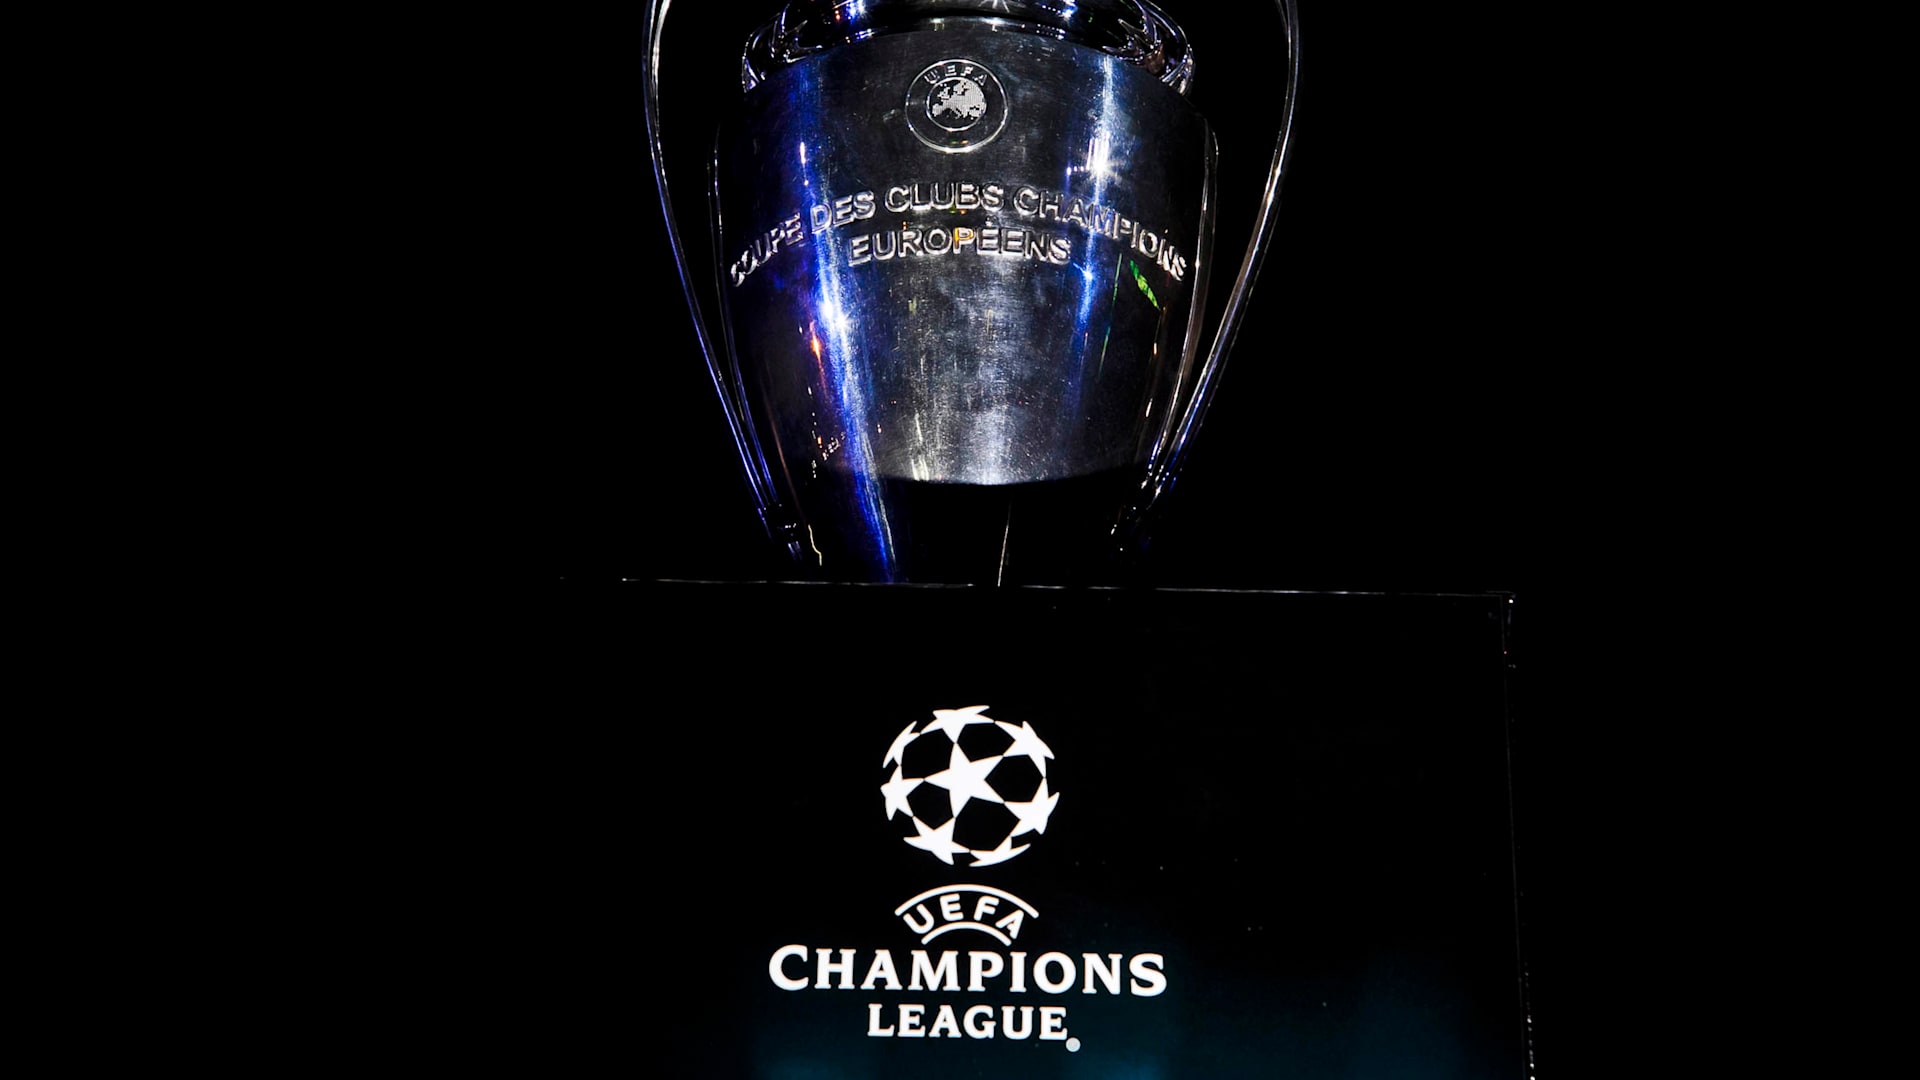 Uefa Champions League 21 22 Draw Where To Watch Live In India